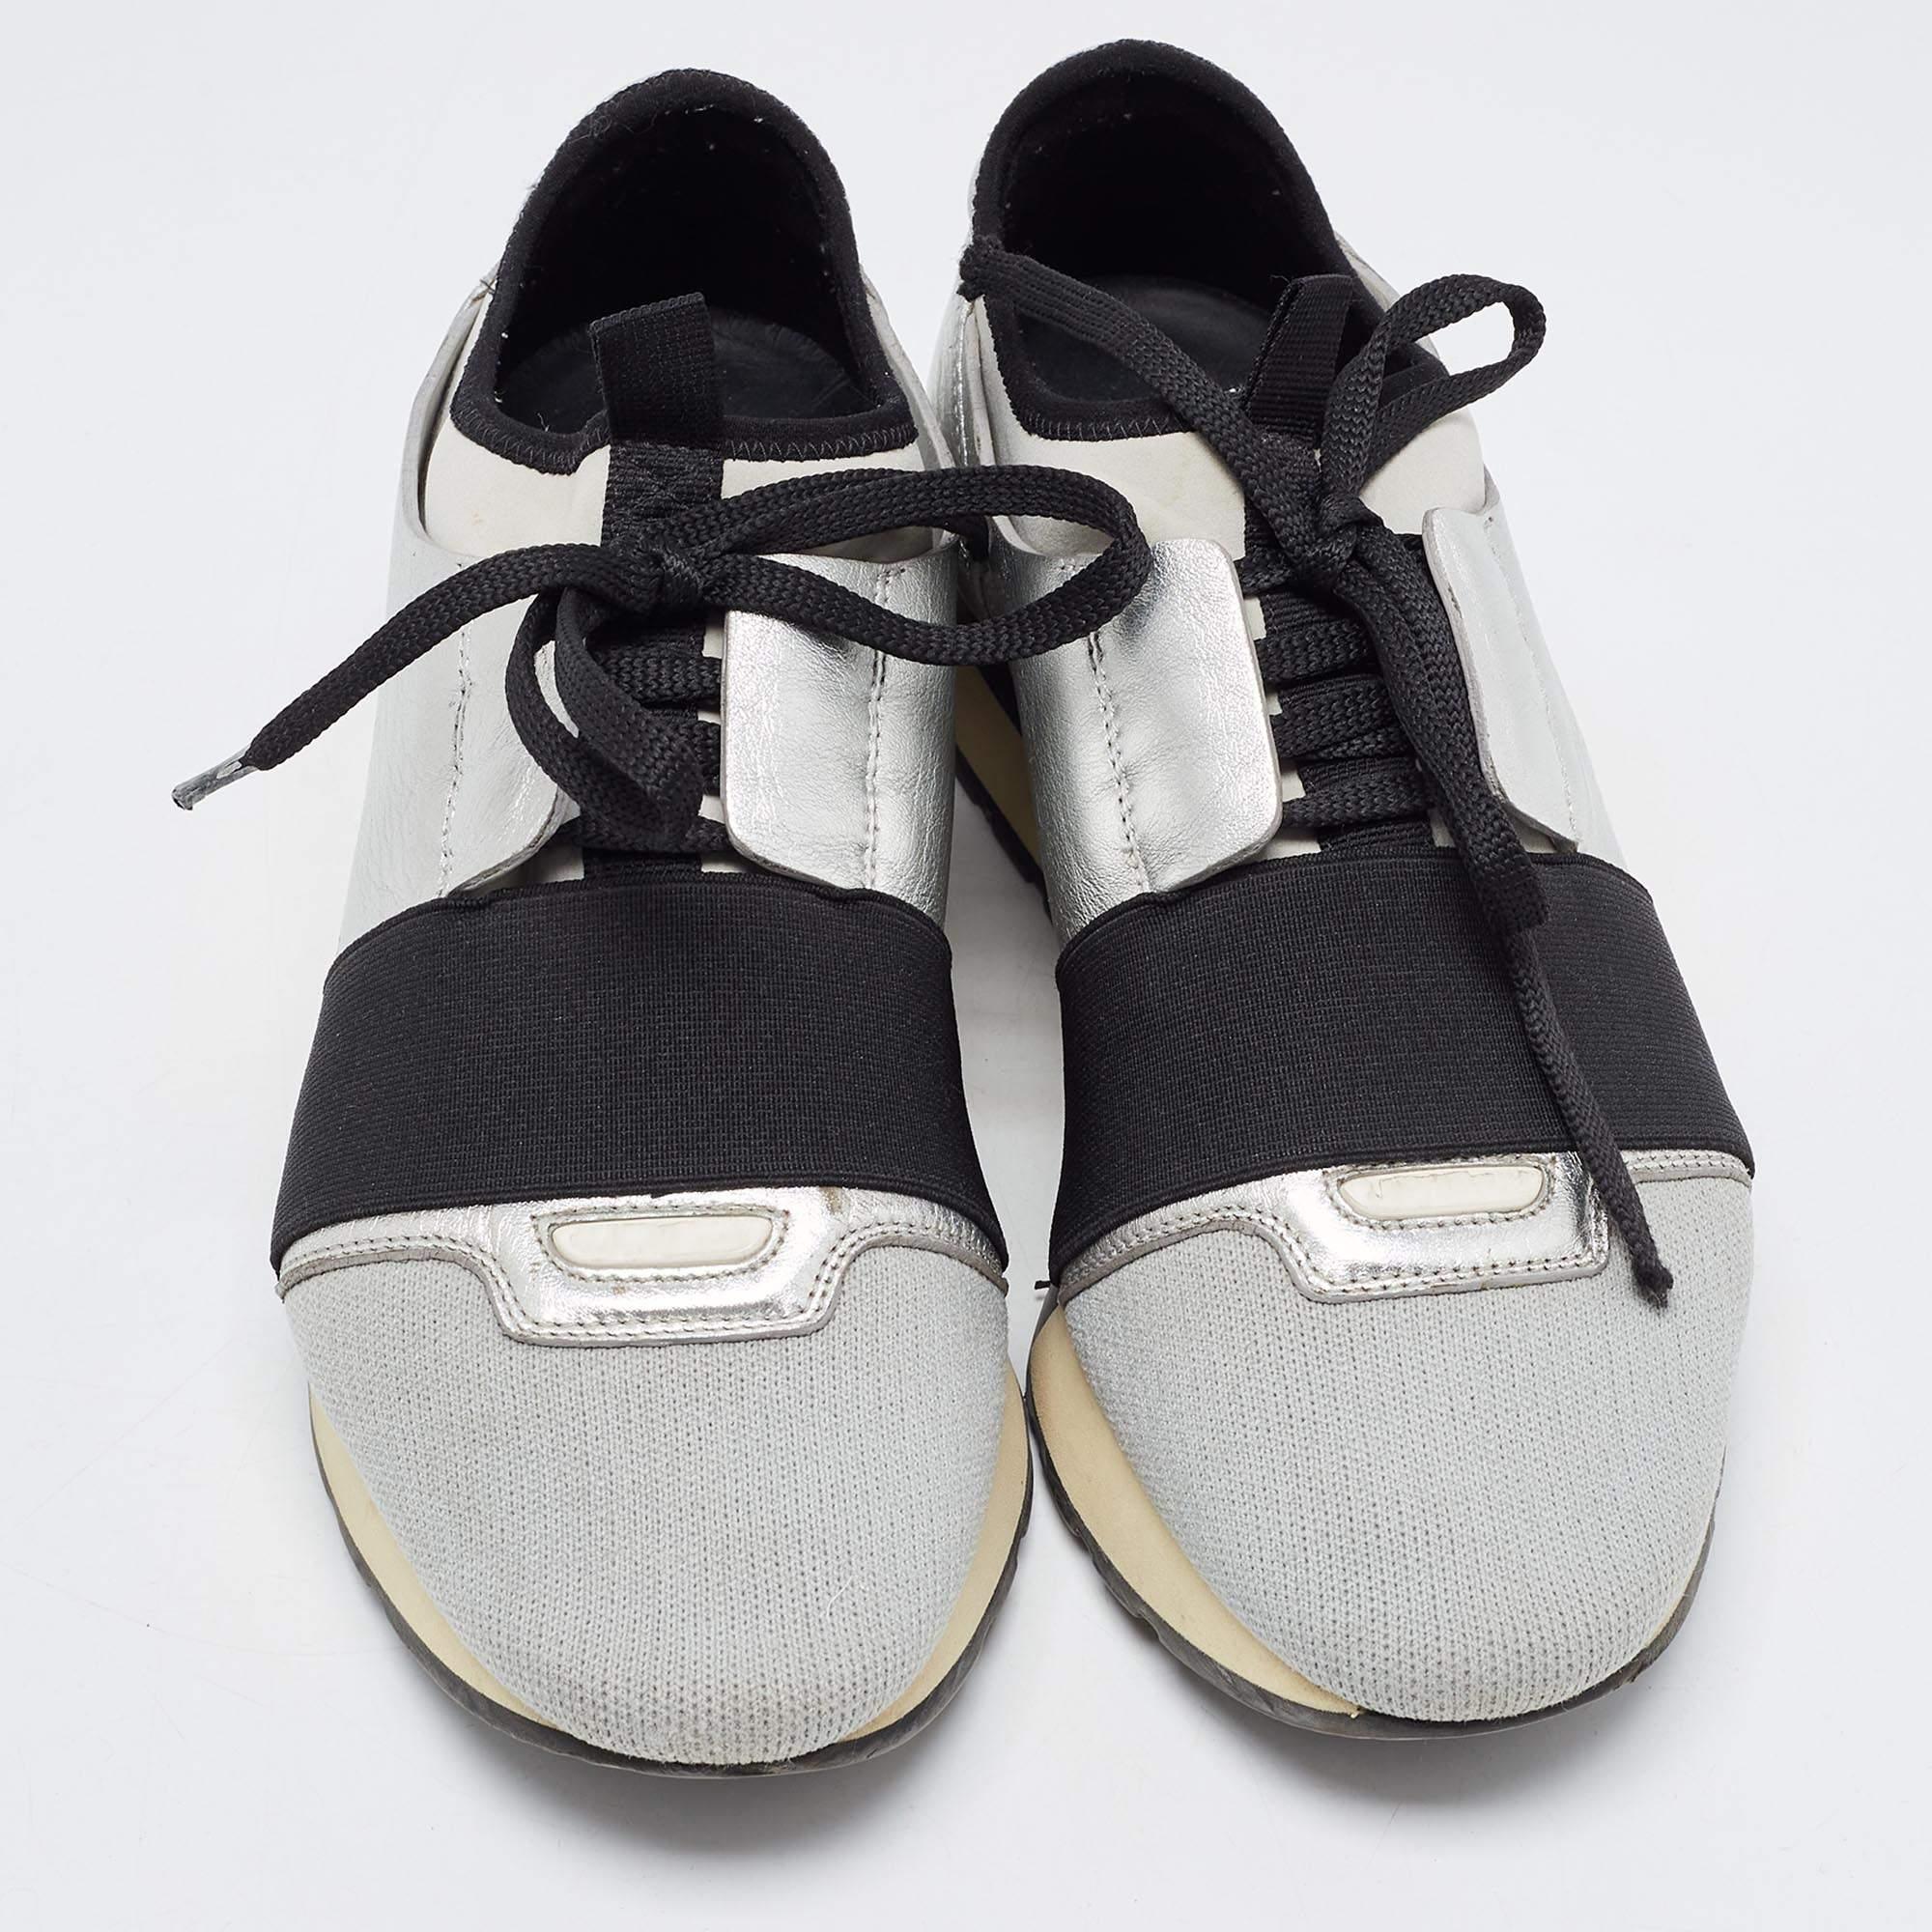 The Balenciaga Race Runner sneakers have been crafted from quality materials and feature a chic silhouette. They flaunt covered toes, strap detailing on the vamps, and tie-up fastenings. They are complete with a leather-lined insole and a tough base